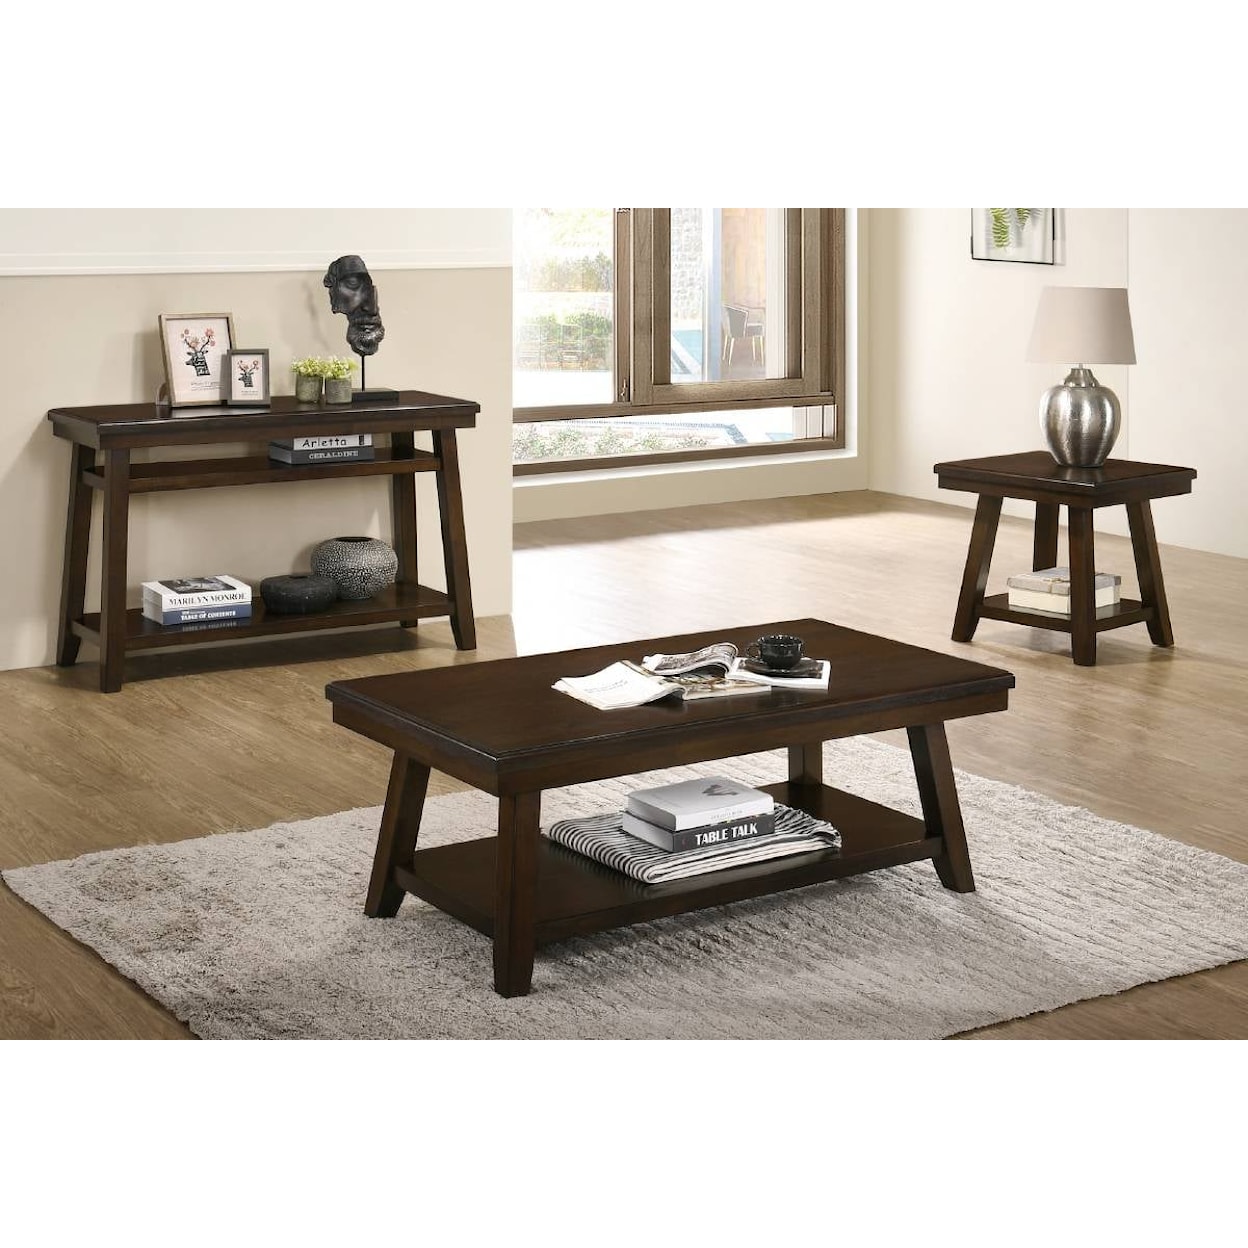 Poundex Occasional Tables HODGE BROWN COFFEE TABLE |